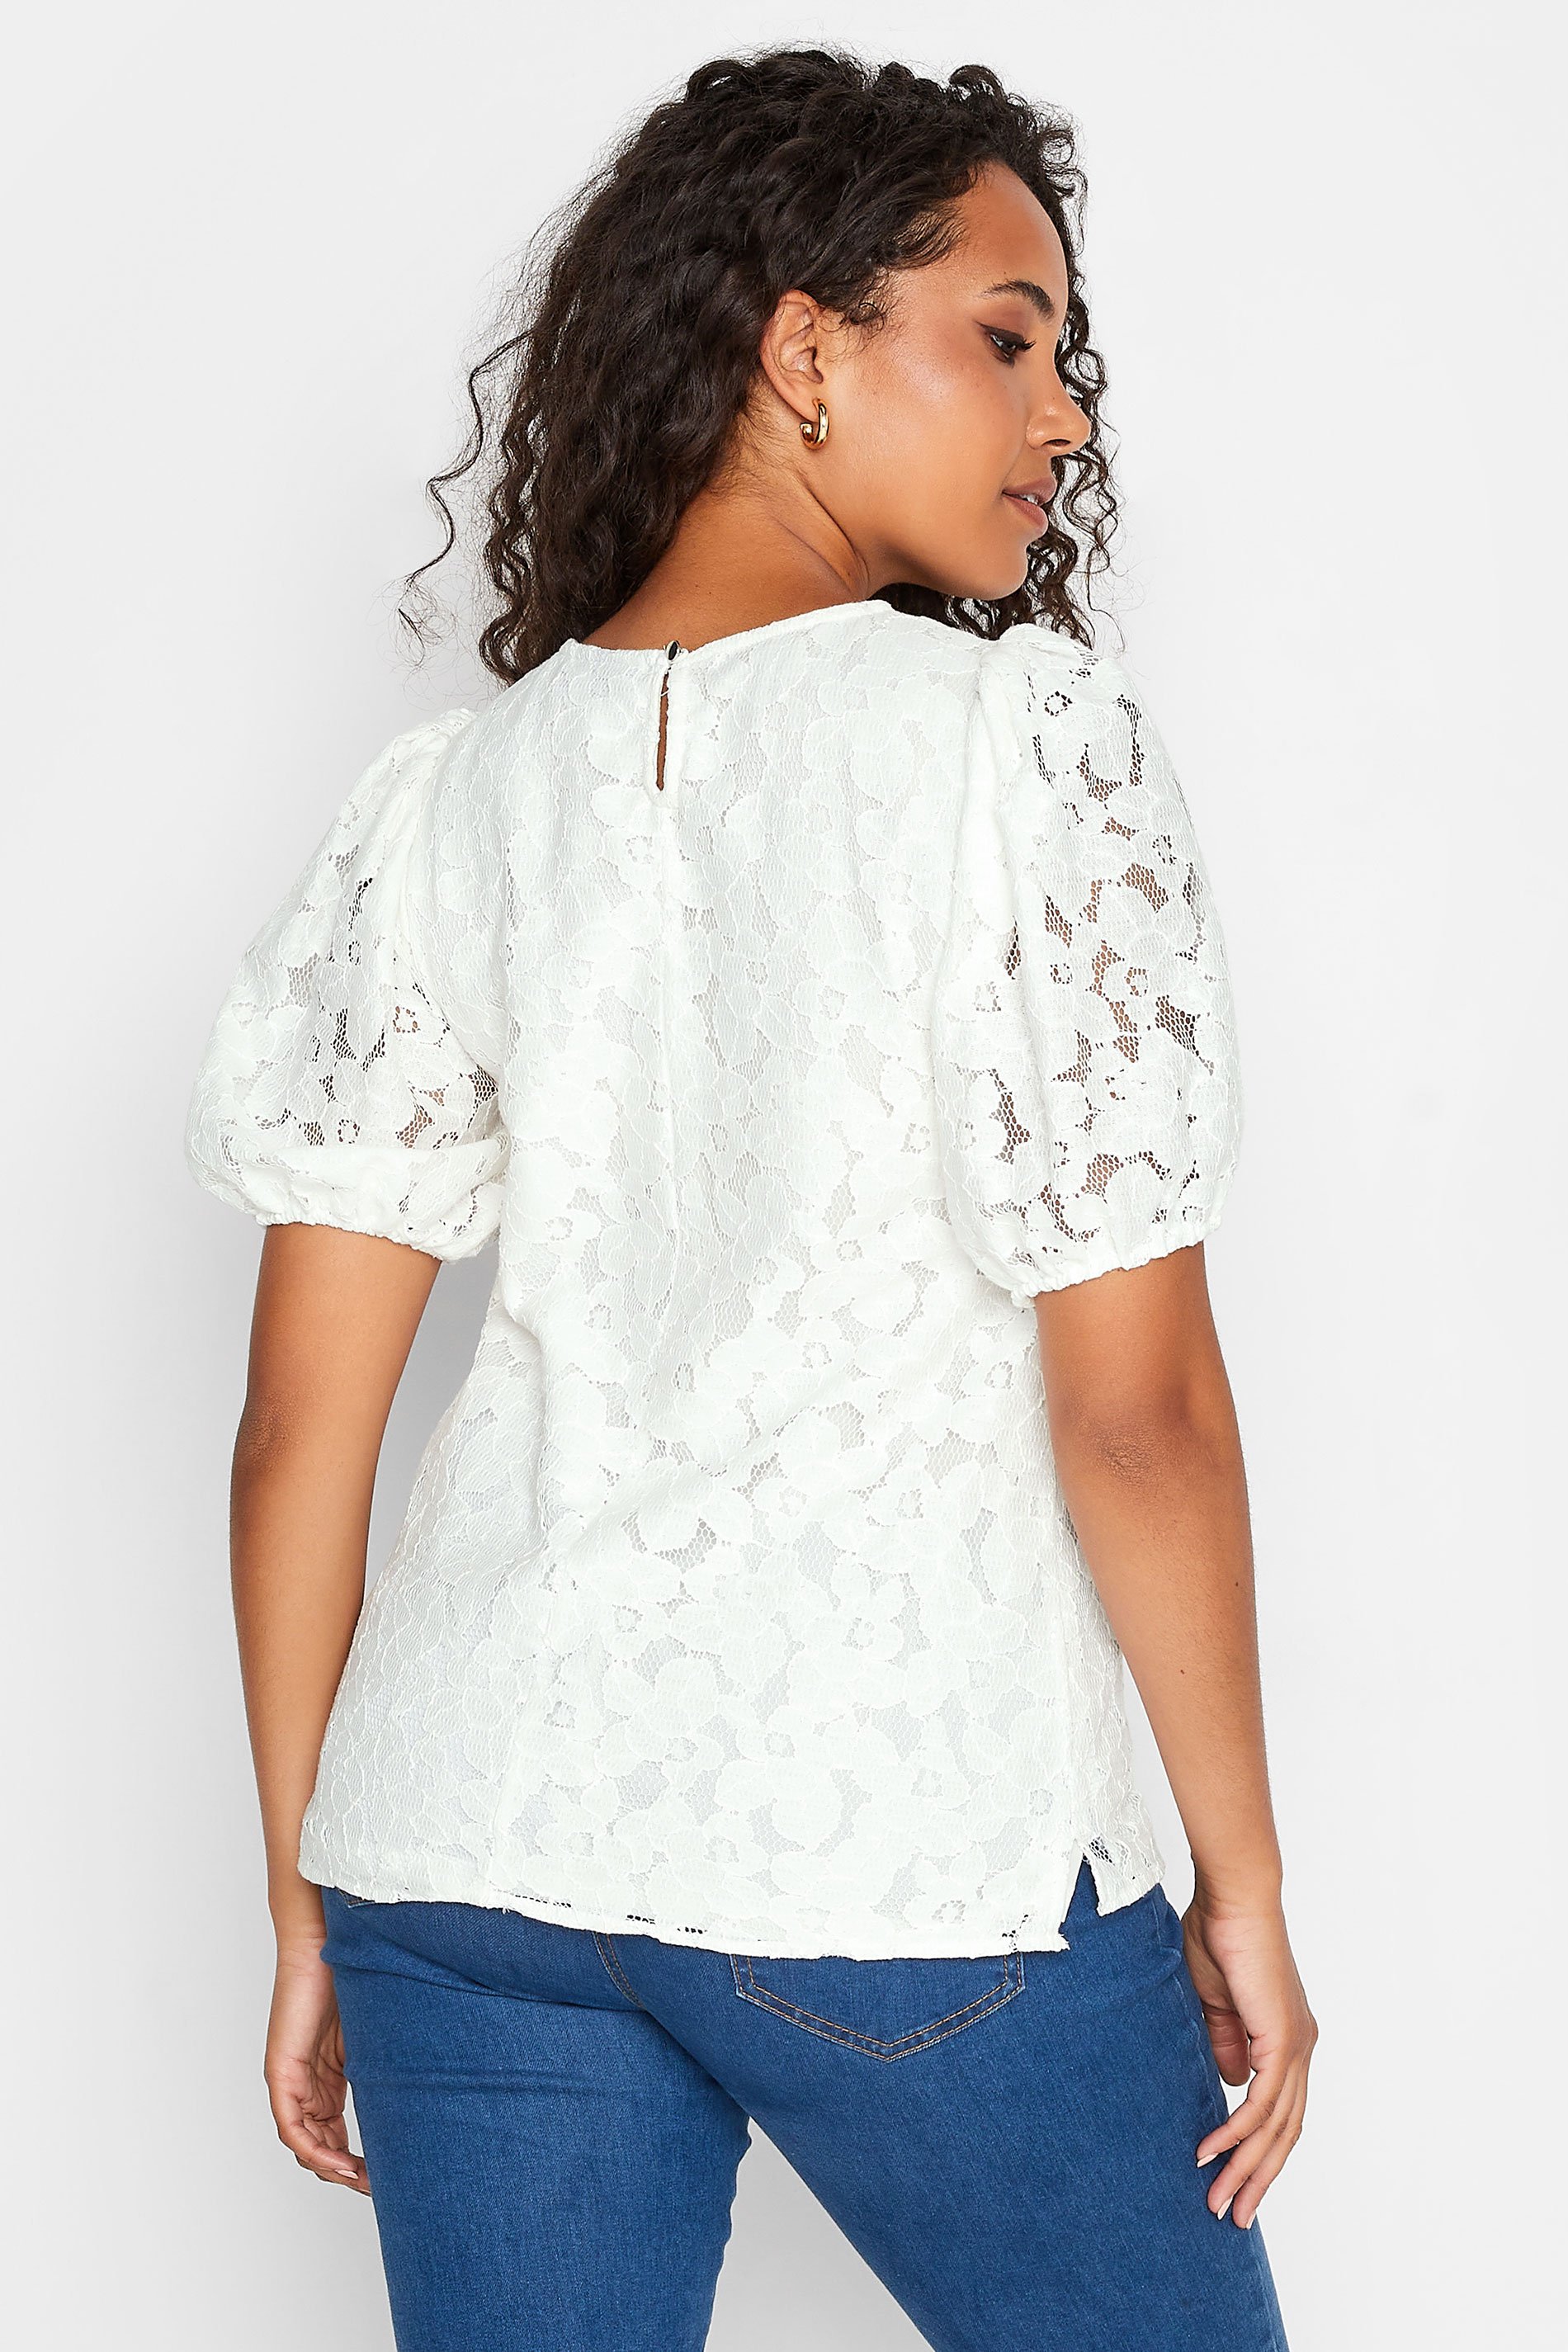 M&Co White Lace Puff Sleeve Blouse | M&Co 3